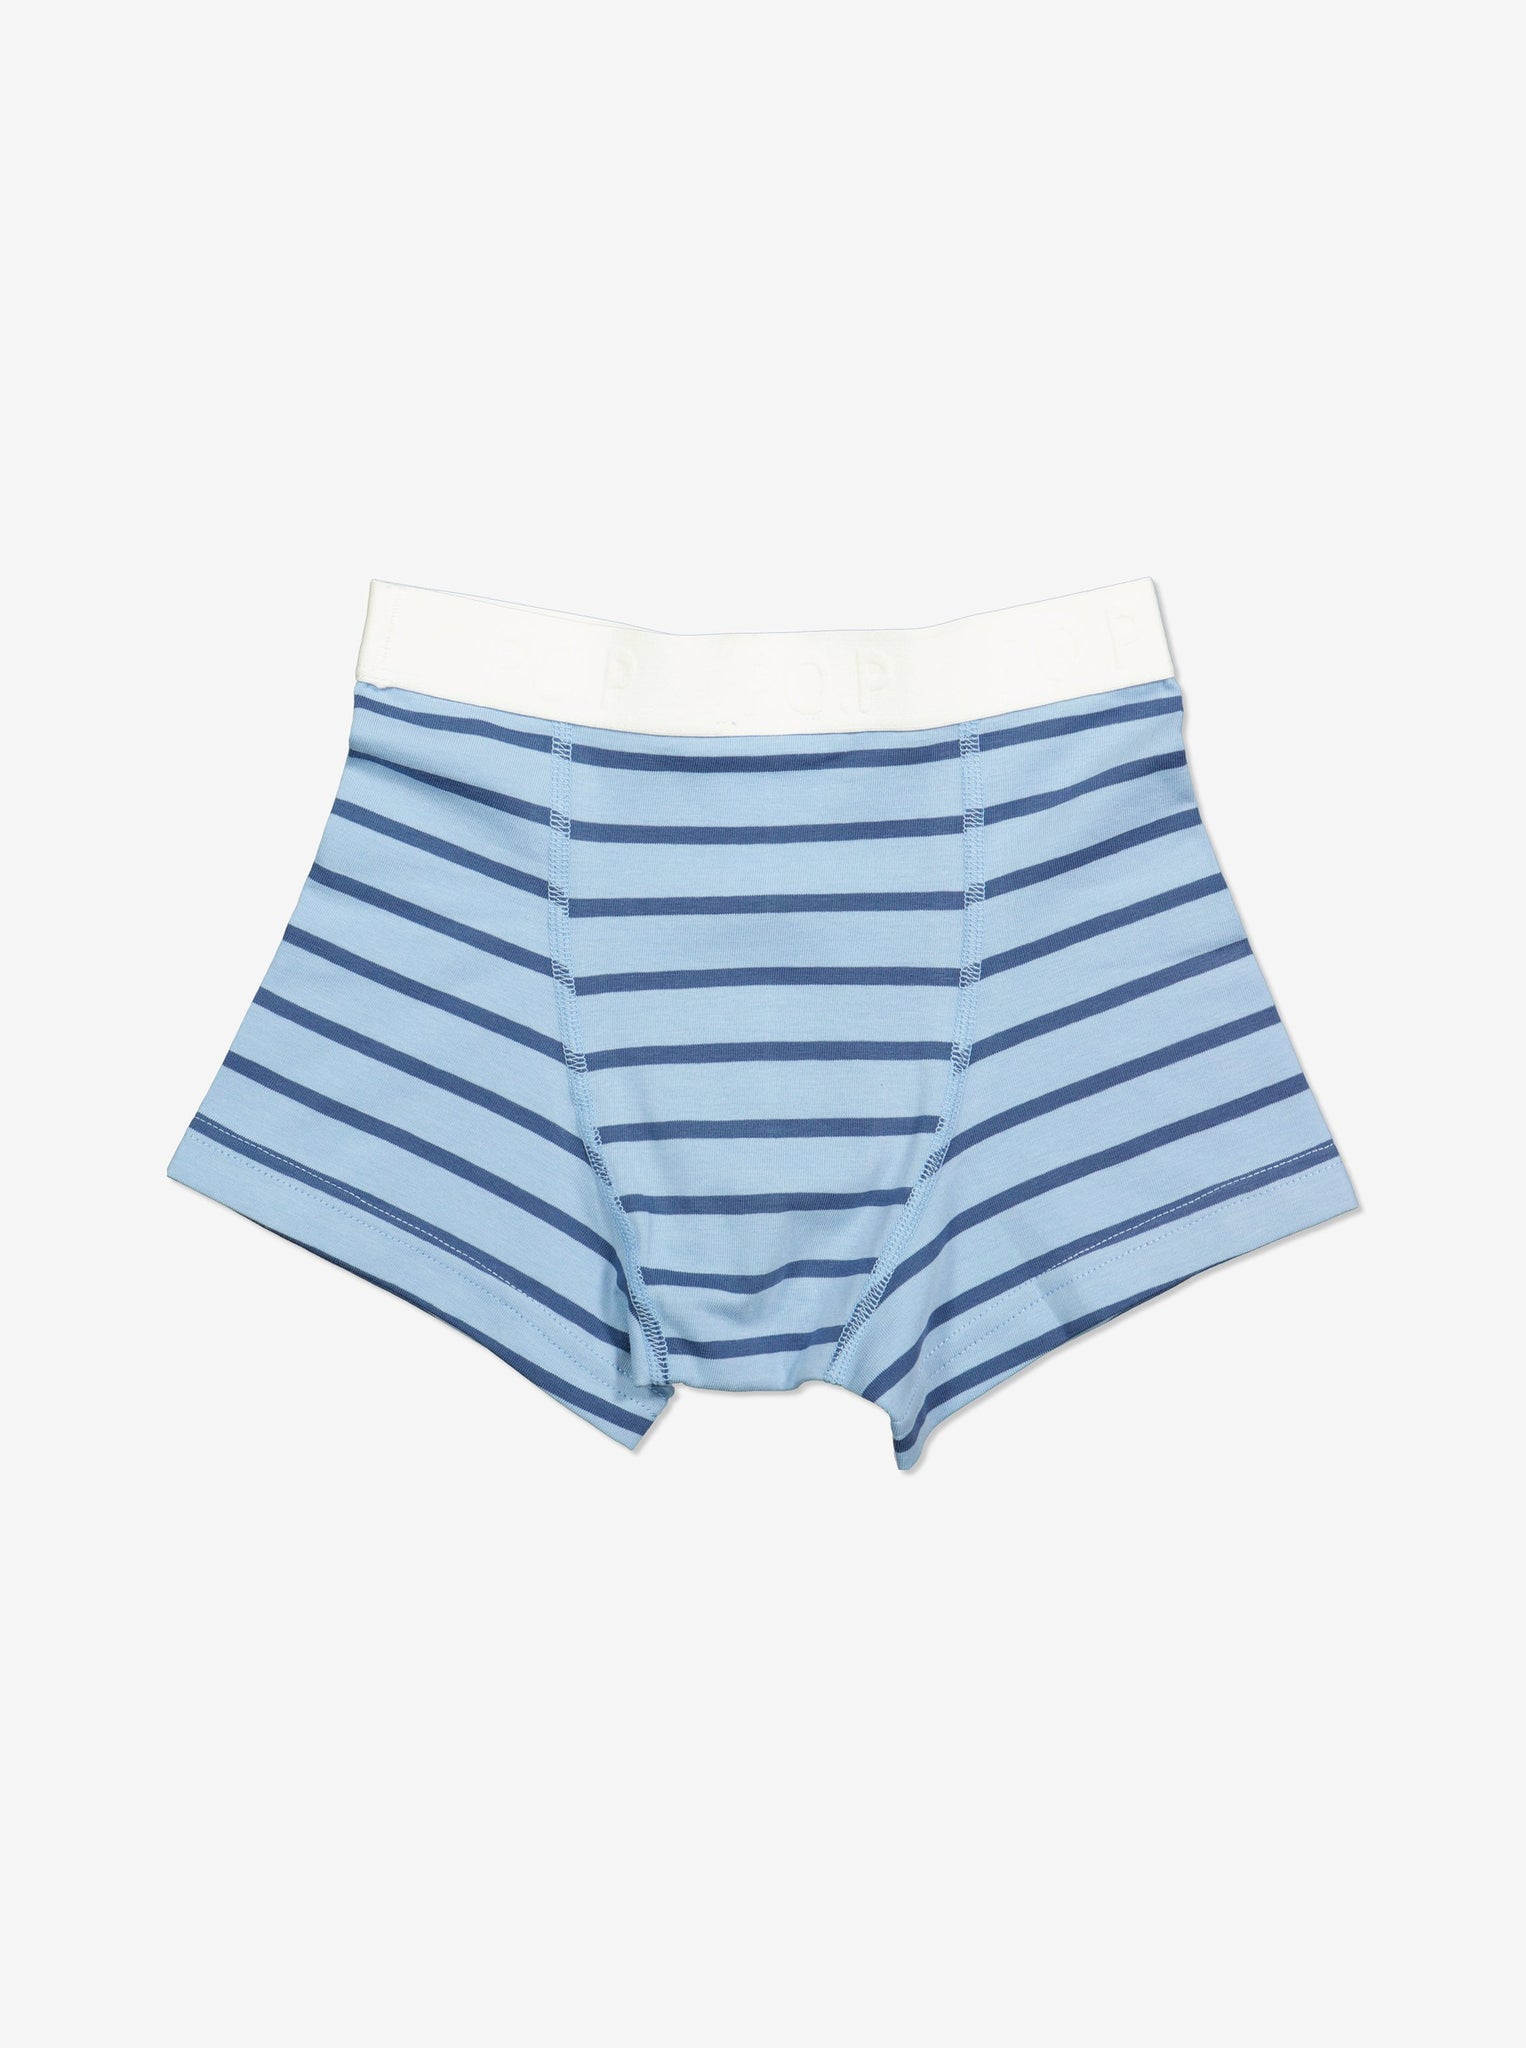  Organic Blue Boxer Shorts from Polarn O. Pyret Kidswear. Made from environmentally friendly materials.